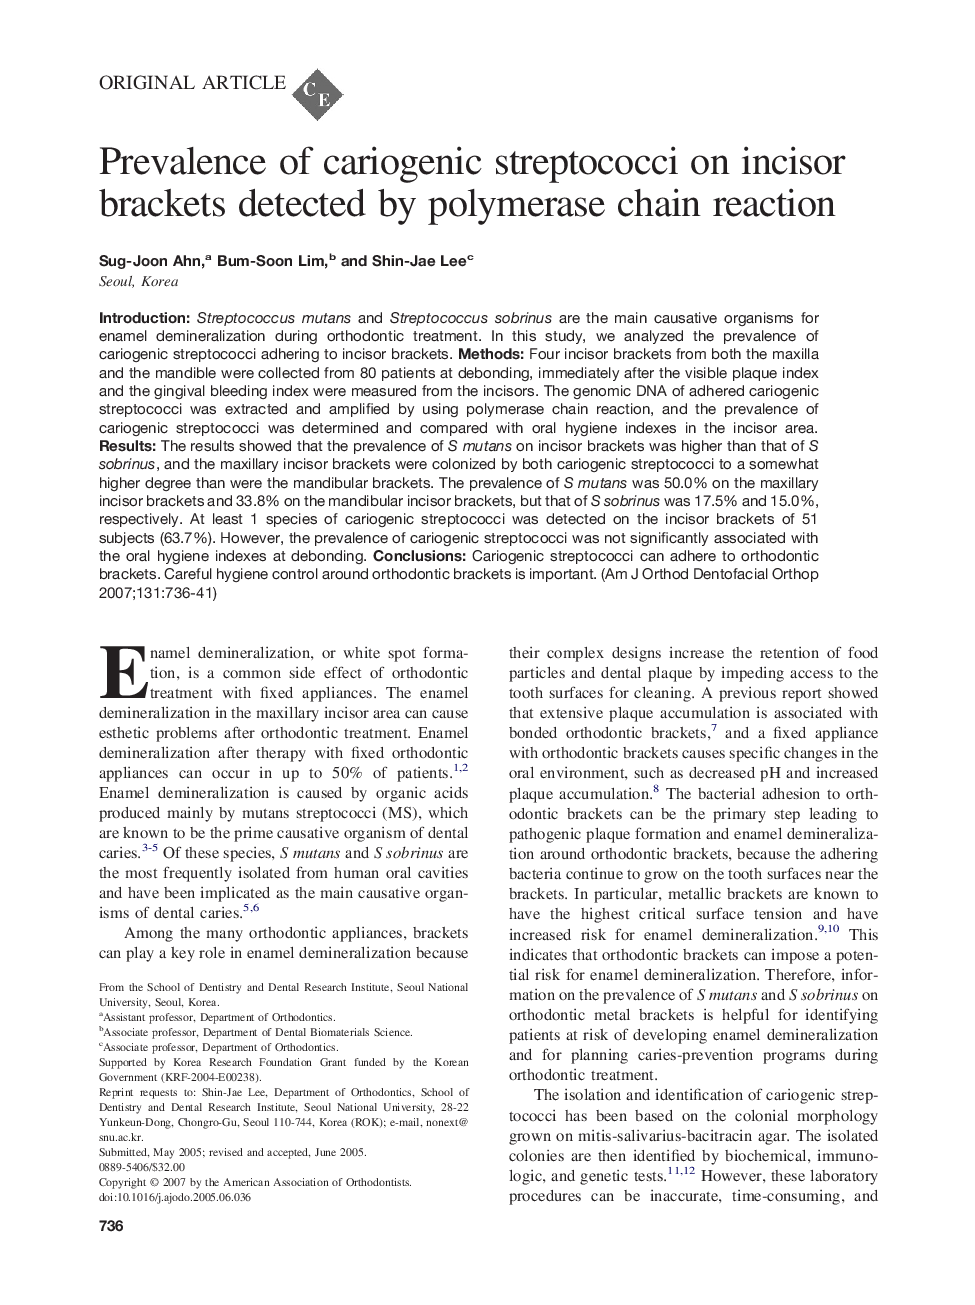 Prevalence of cariogenic streptococci on incisor brackets detected by polymerase chain reaction 